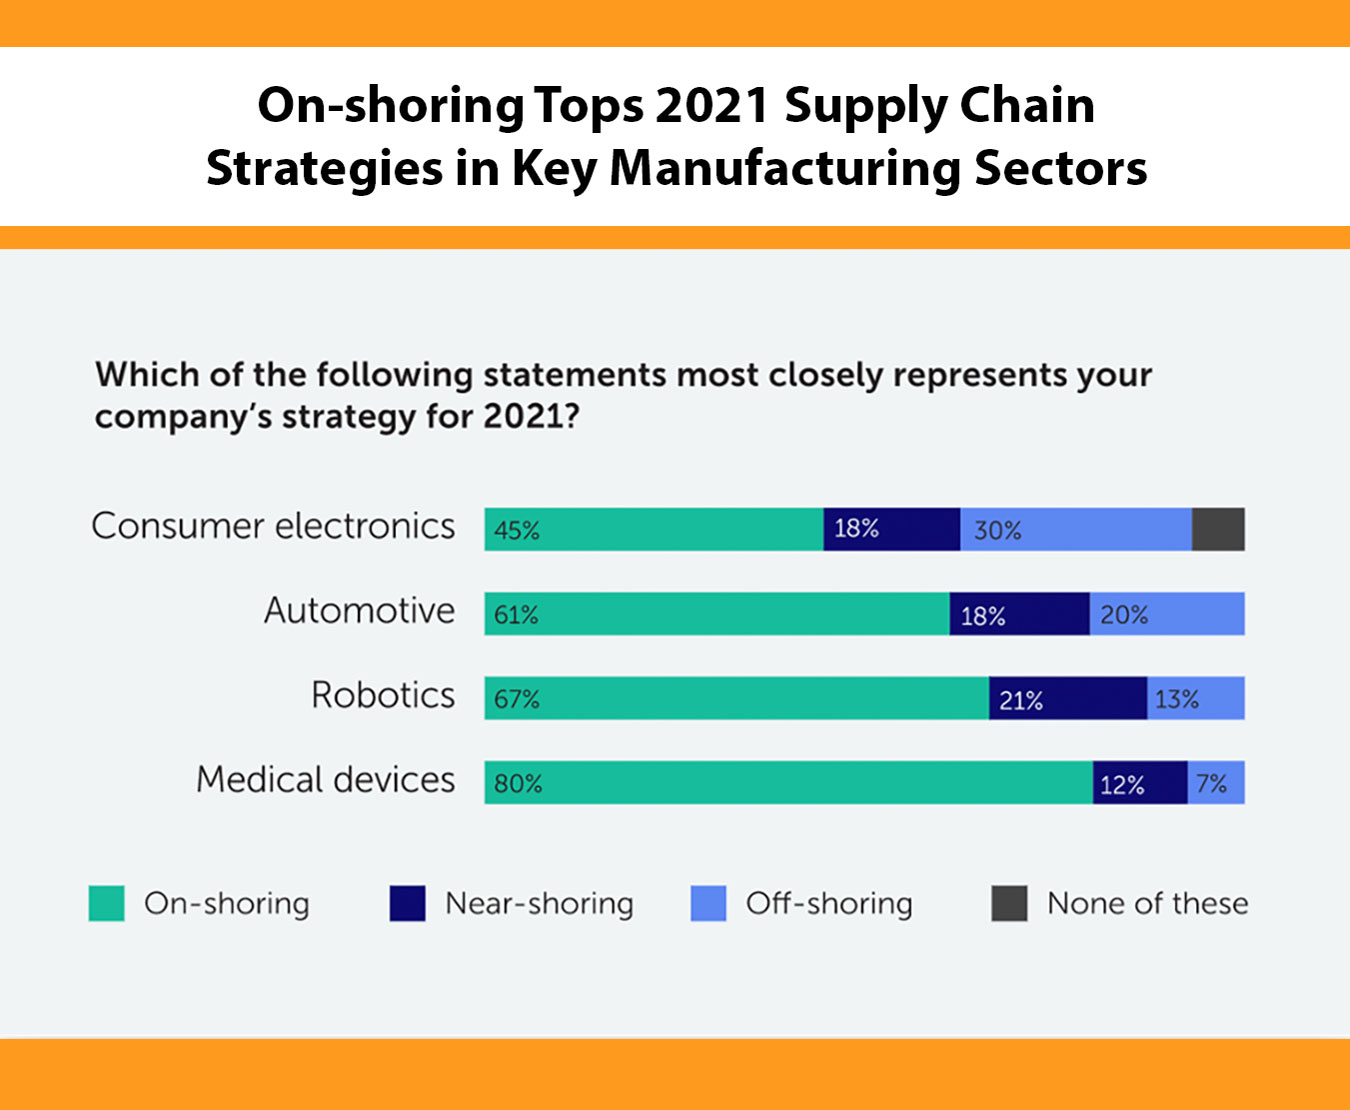 marketing manufacturing sourcing practices makes sense as on-shoring tops 2021 supply chain strategies in consumer electronics, automotive, robotics, and medical devices